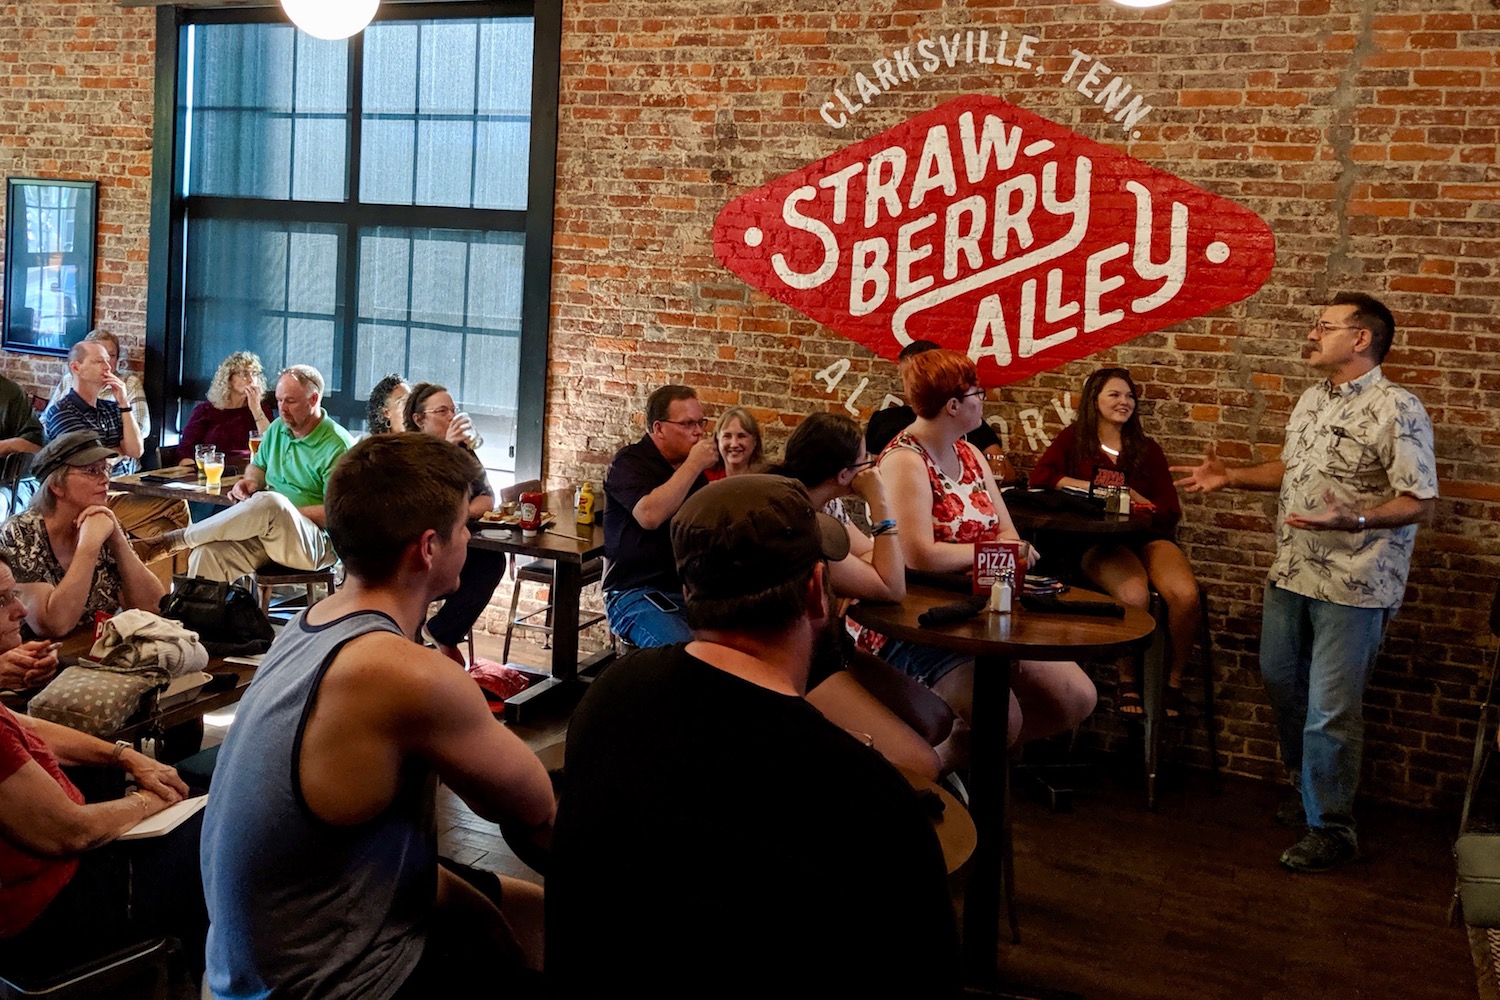 Austin Peay State University’s Science on Tap – which is set to return 5:30 p.m. Tuesday, Nov. 5, at Strawberry Alley Ale Works – is adding an important element to November’s event.